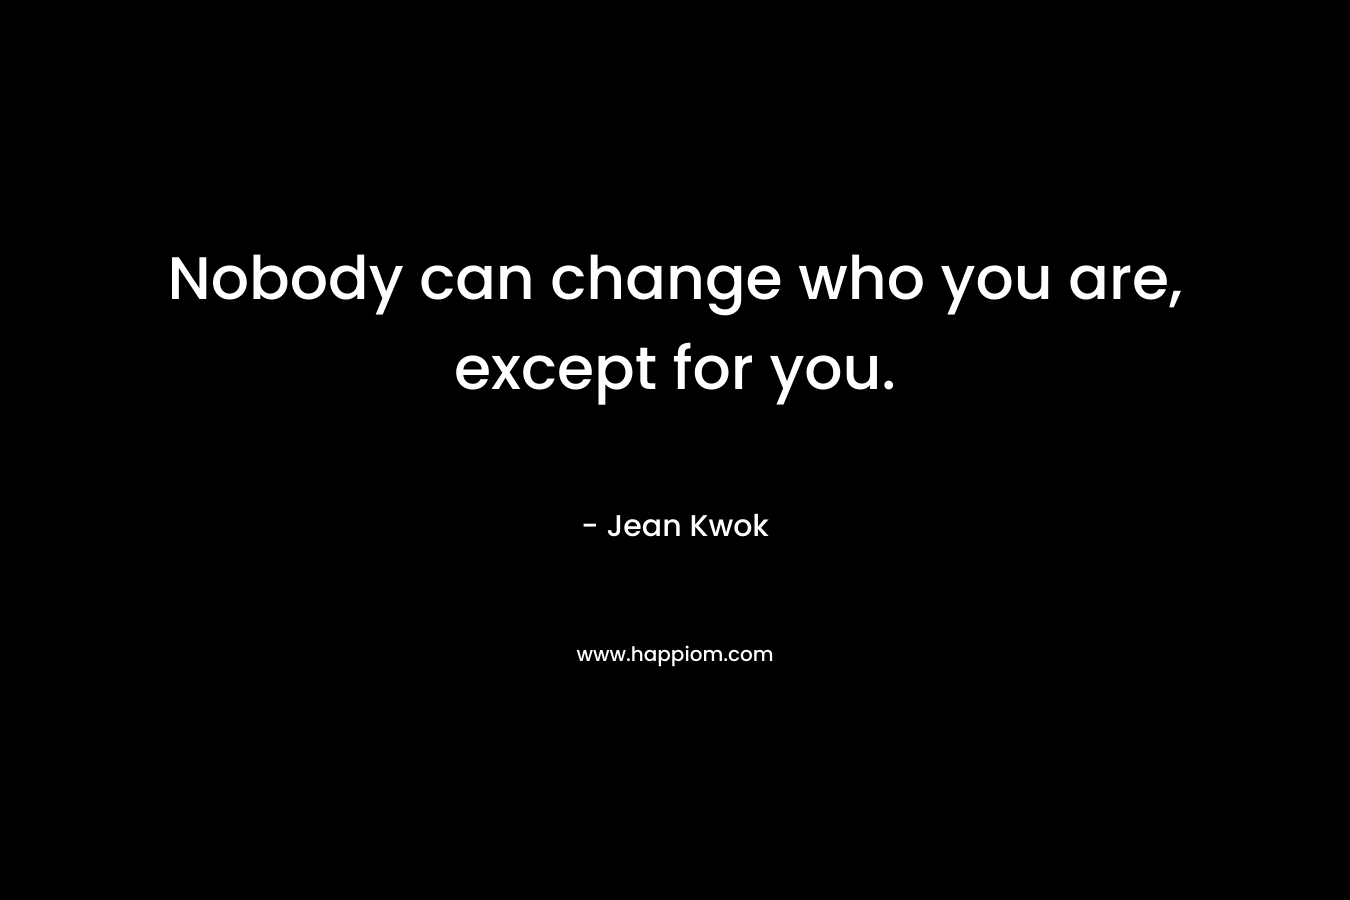 Nobody can change who you are, except for you.